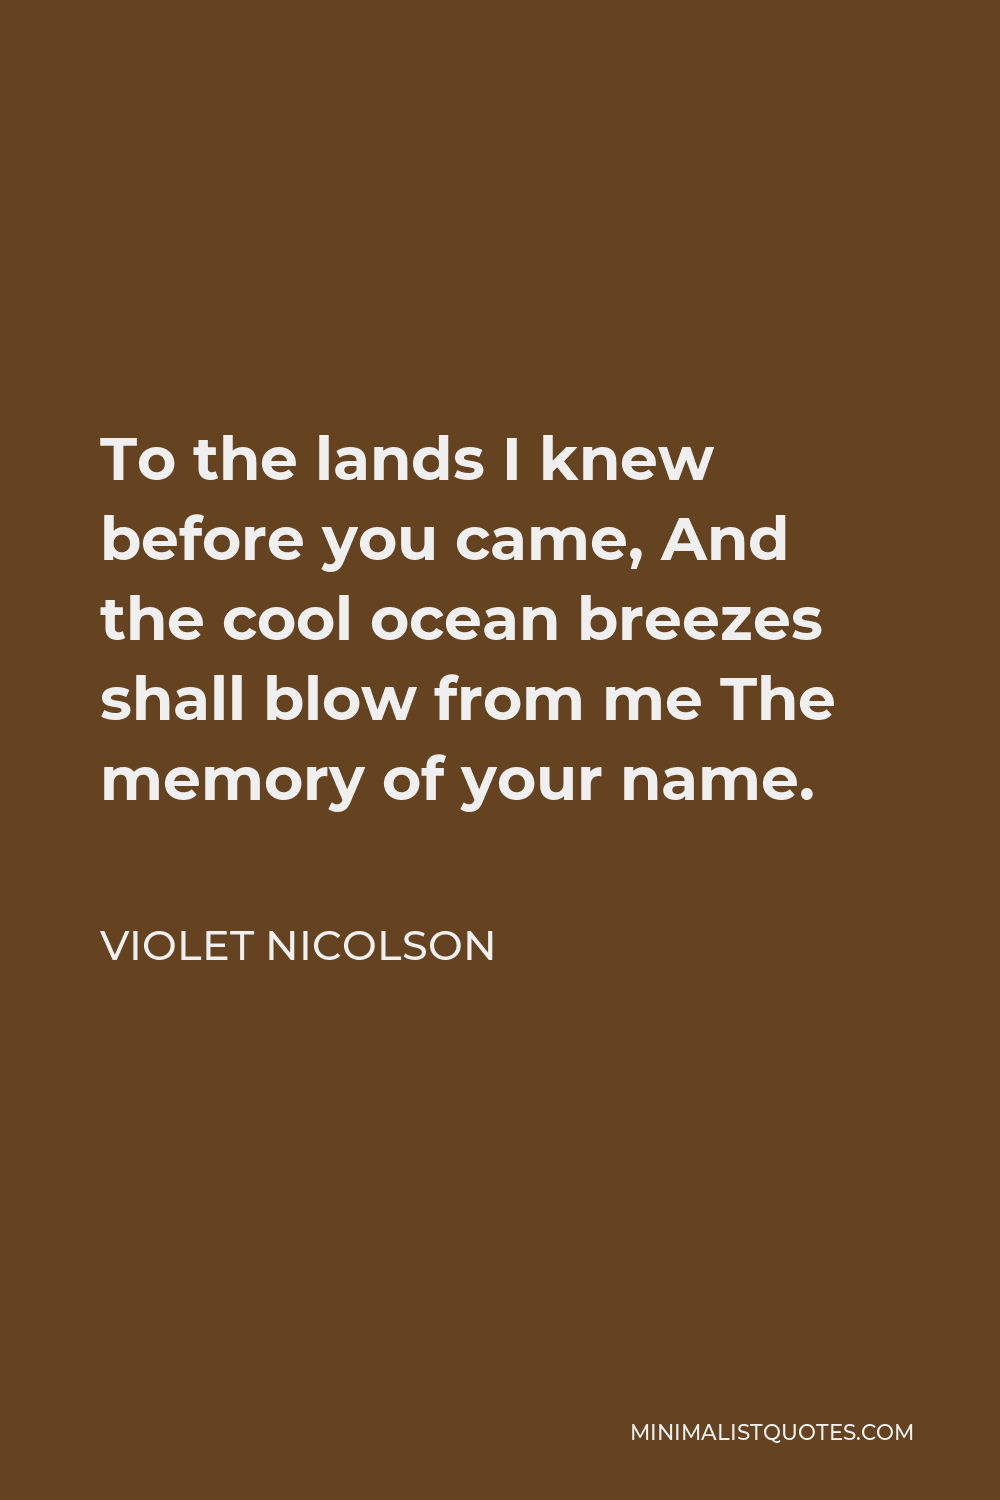 Violet Nicolson Quote - To the lands I knew before you came, And the cool ocean breezes shall blow from me The memory of your name.